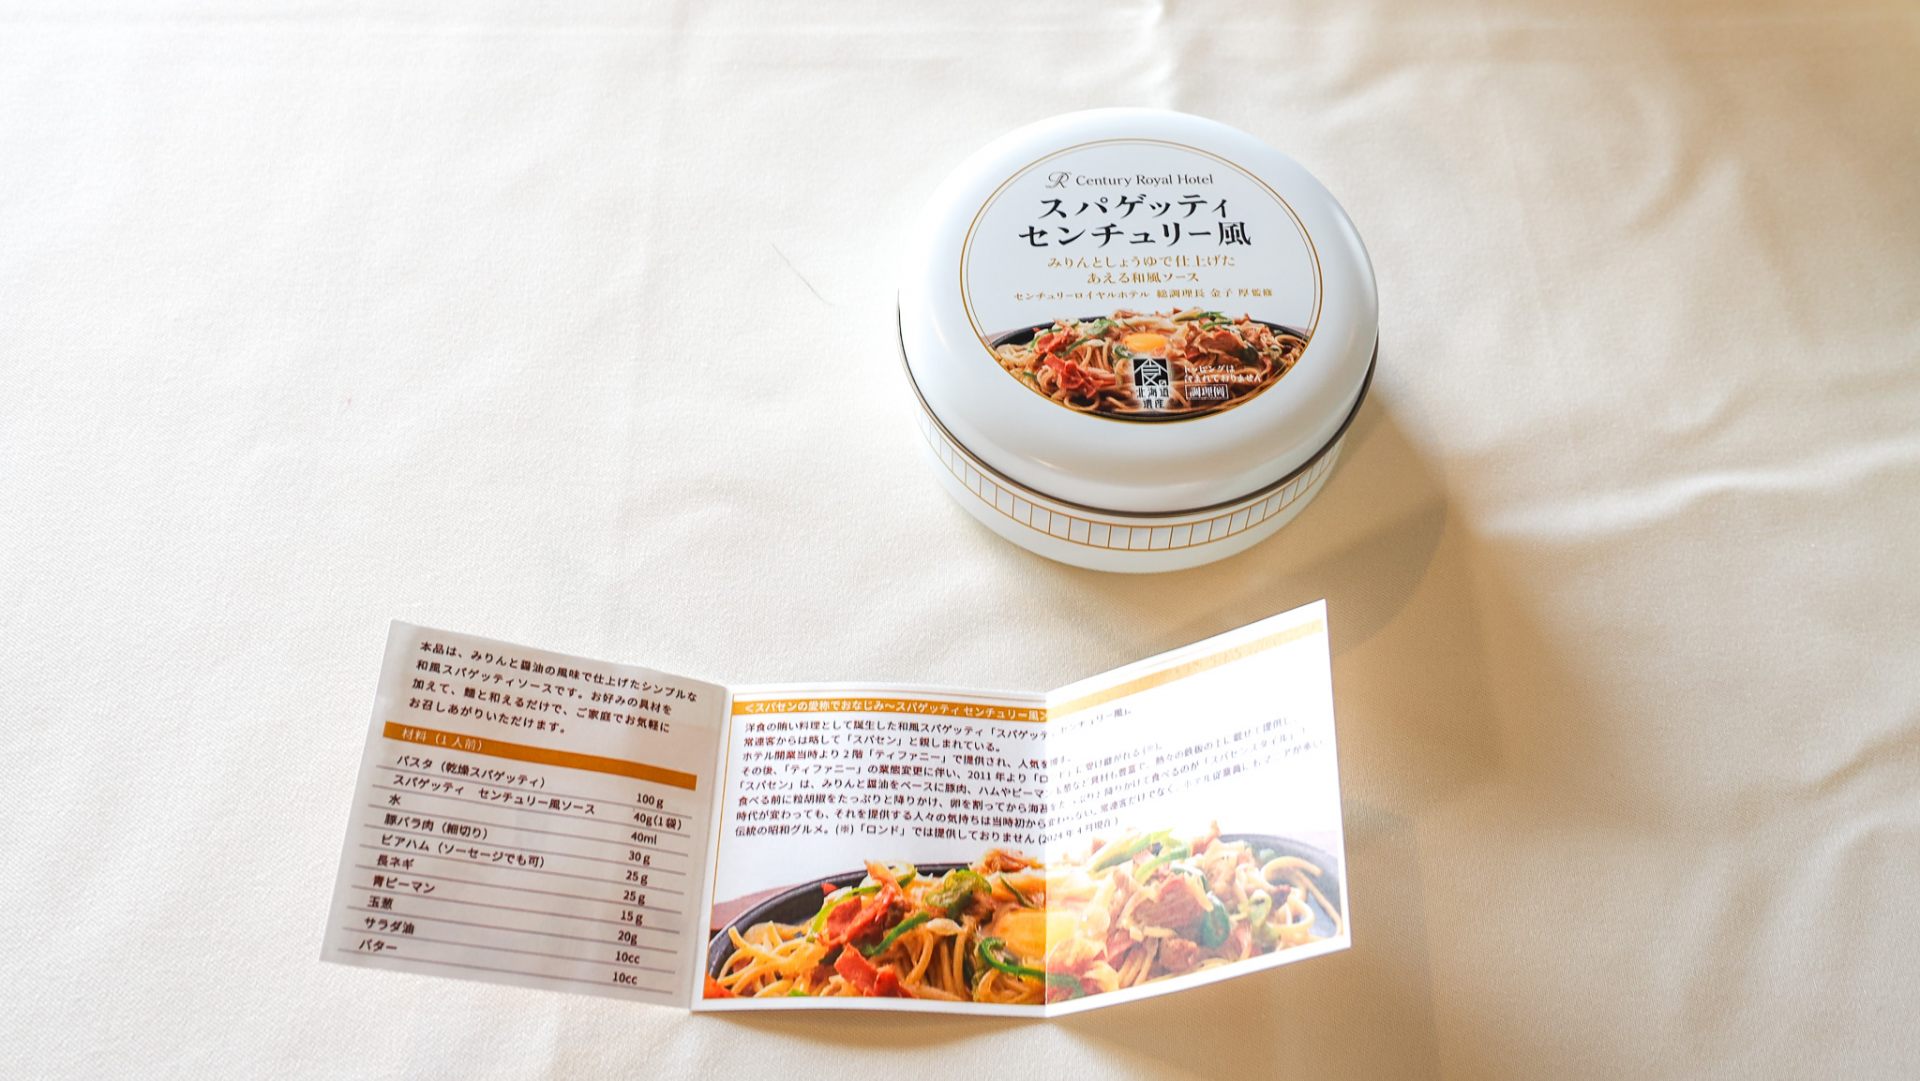 The newly commercialized Sauce for the Japanese style pasta from "Sky Restaurant RONDO" of Century Royal Hotel